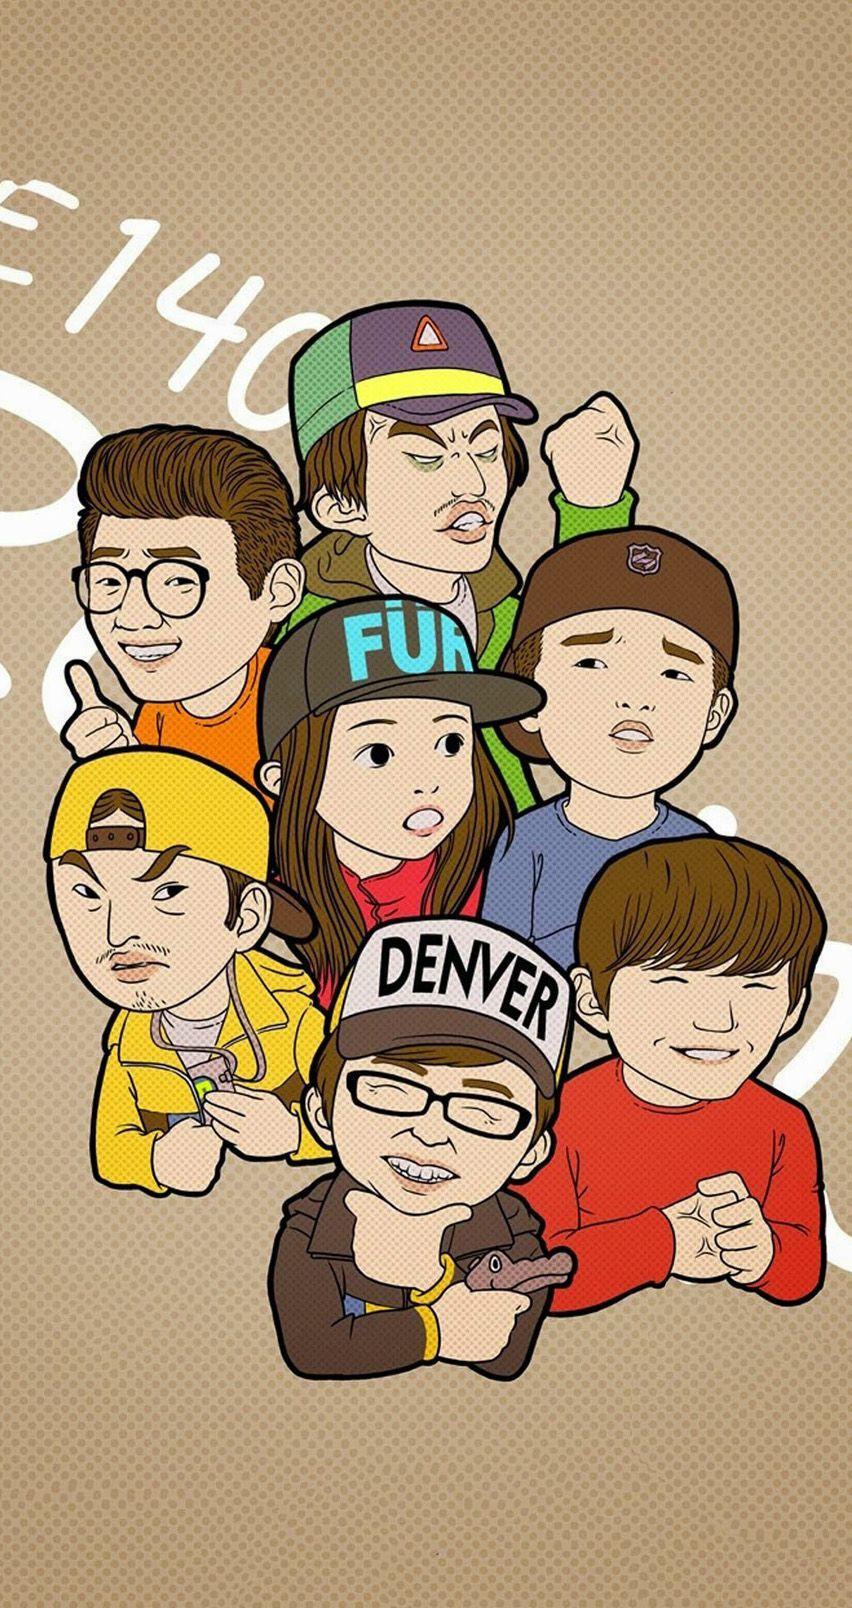 Running Man Cartoon Wallpaper For IPhone 5 5s 5c And IPhone 6 6